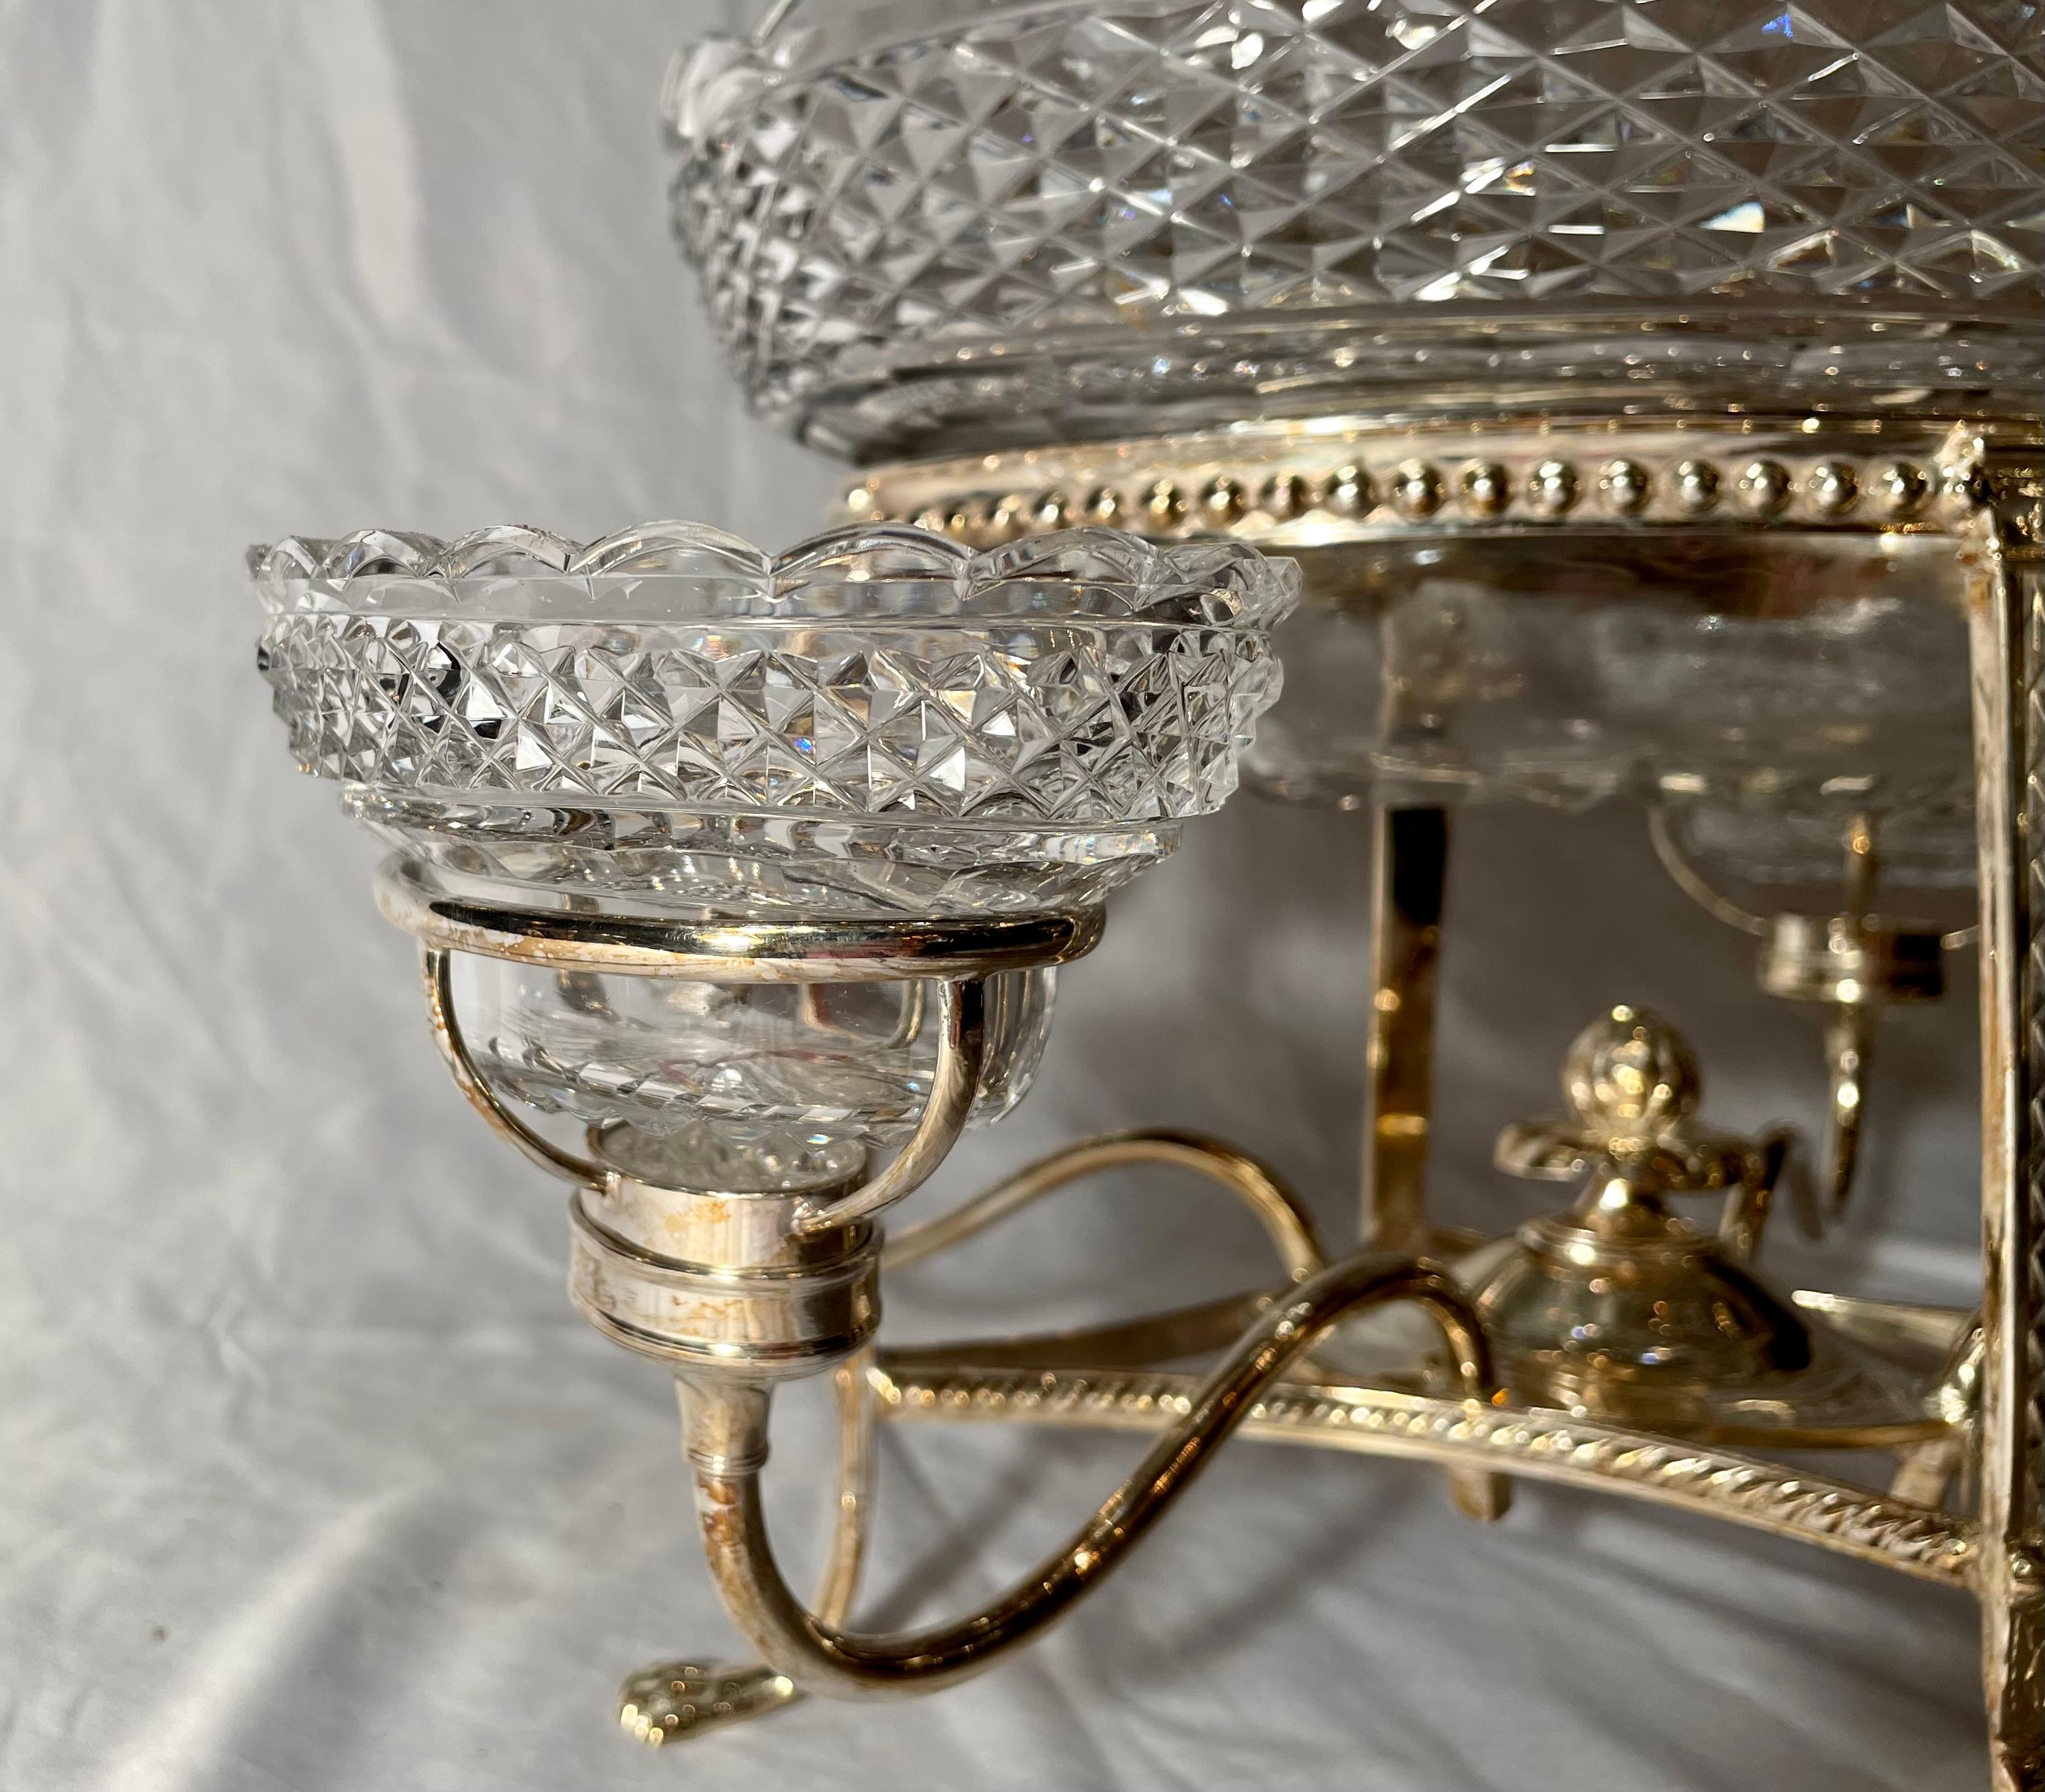 20th Century Antique English Silver Plated and Crystal Centerpiece, circa 1890-1910 For Sale